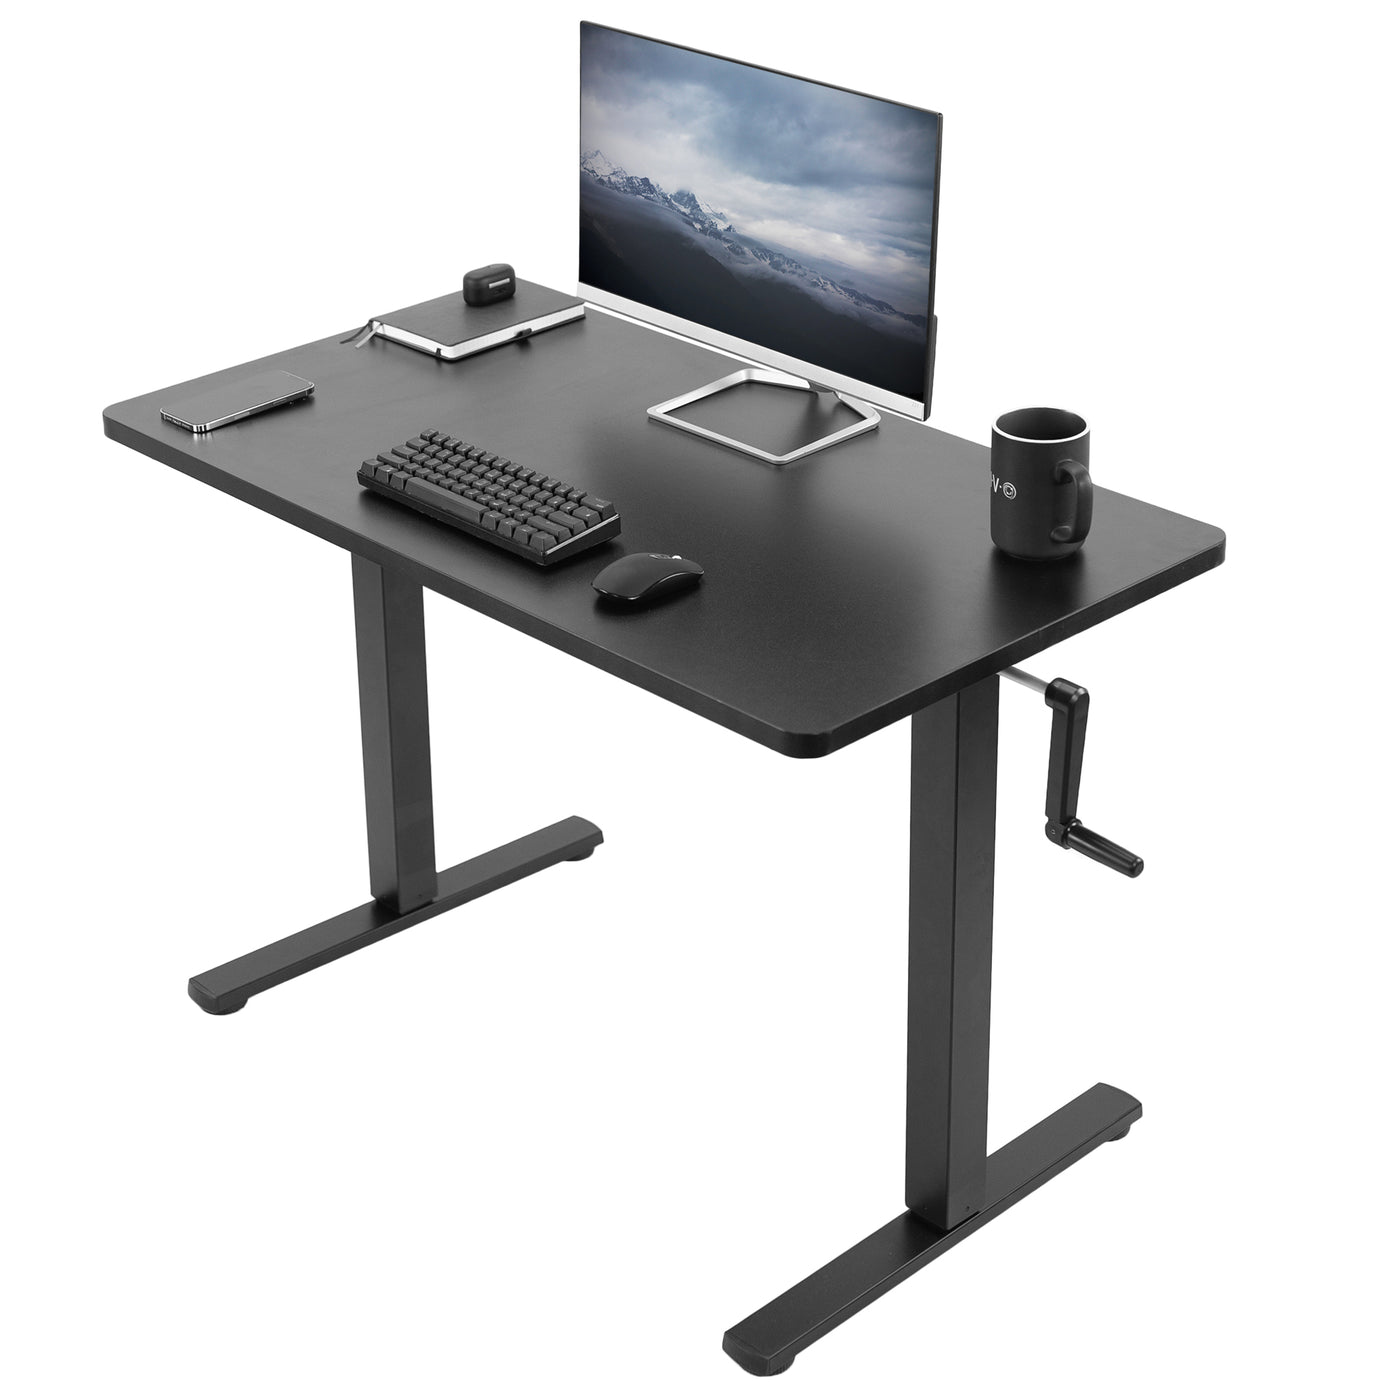 Manual height adjustable desk with a side crank.